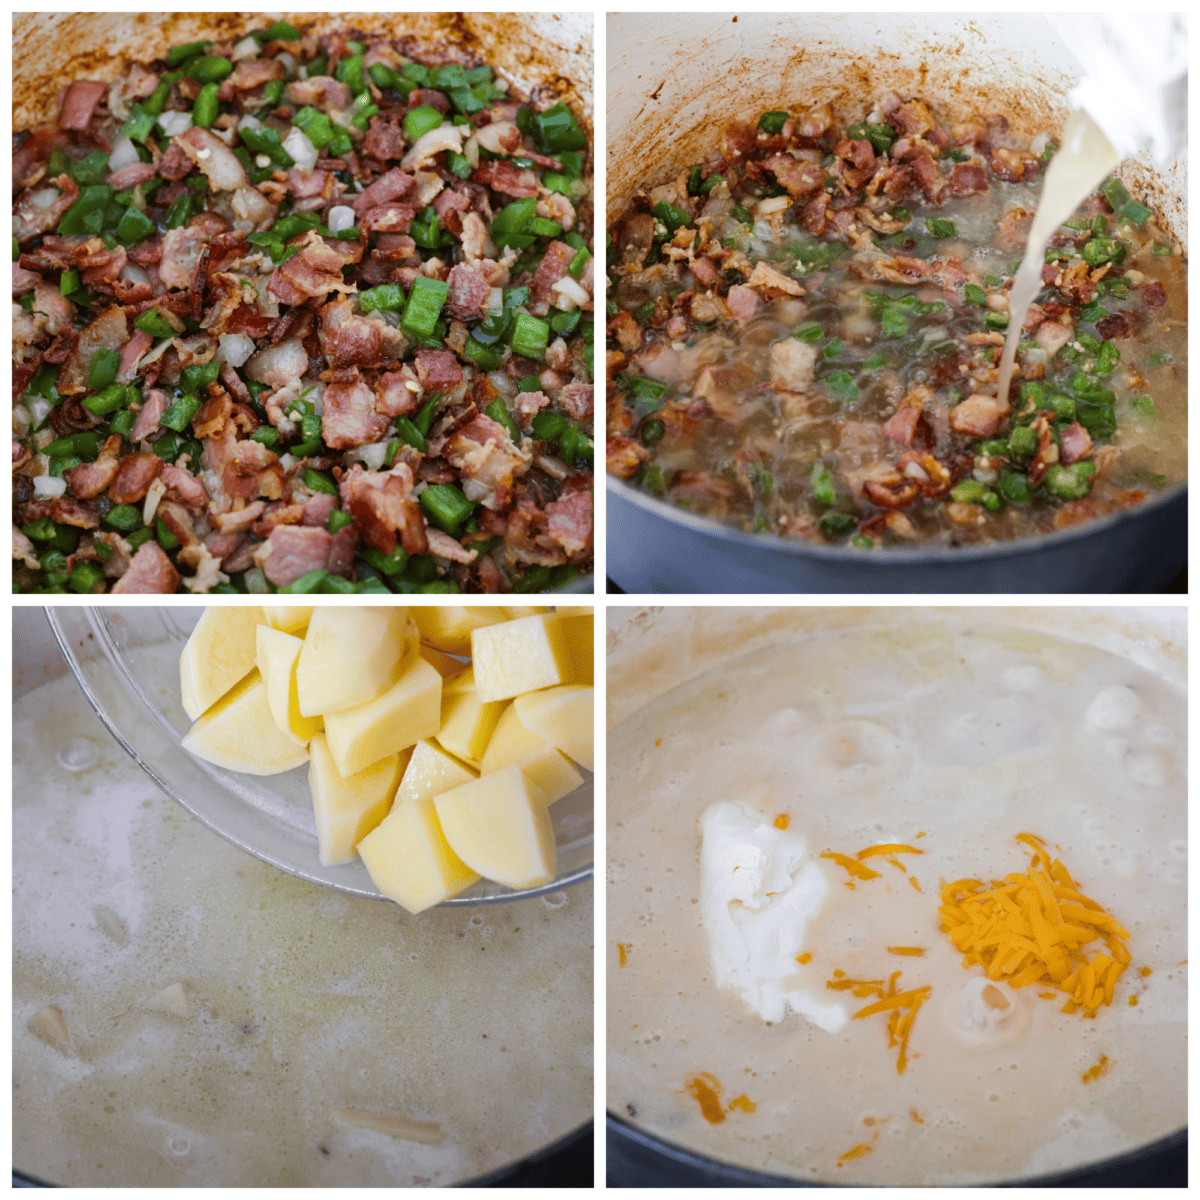 4-photo collage of the jalapeno popper soup being prepared, step-by-step.